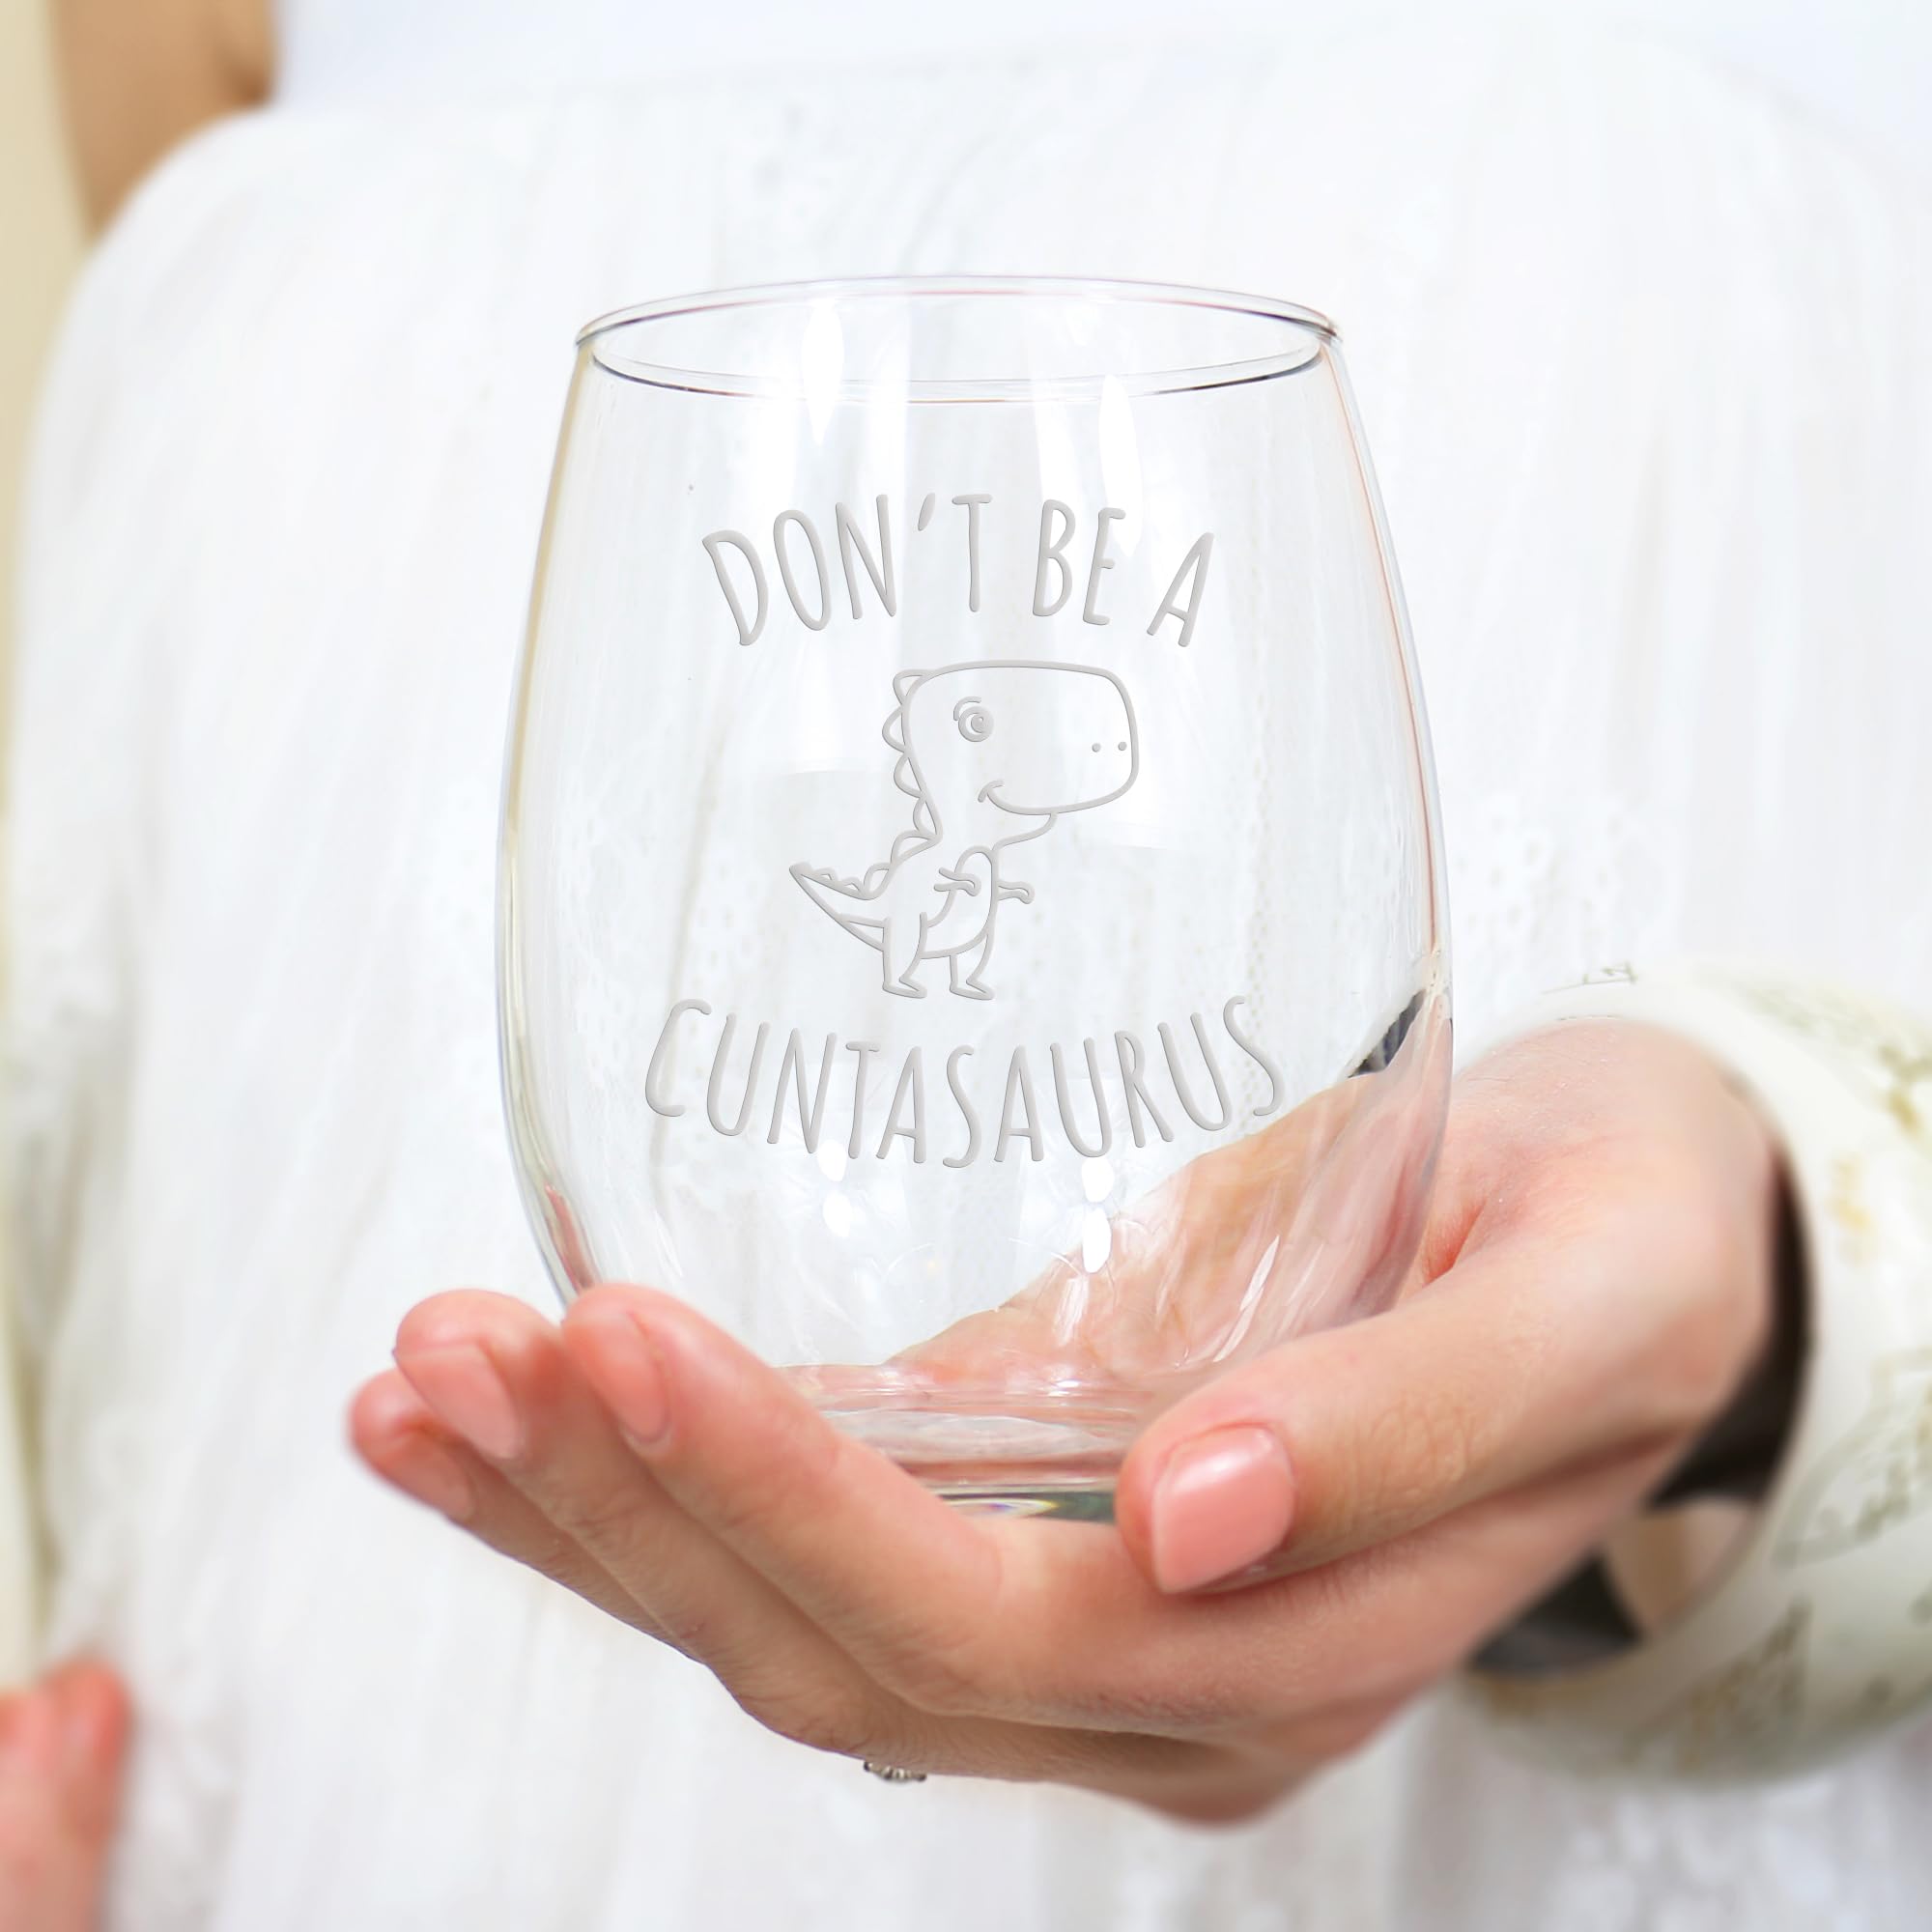 Dont Be A Cuntasaurus Dinosaur Funny Friend Stemless Wine Glass - Funny Gift, Funny Wine Glass, Sarcastic Gift, Friend Gift